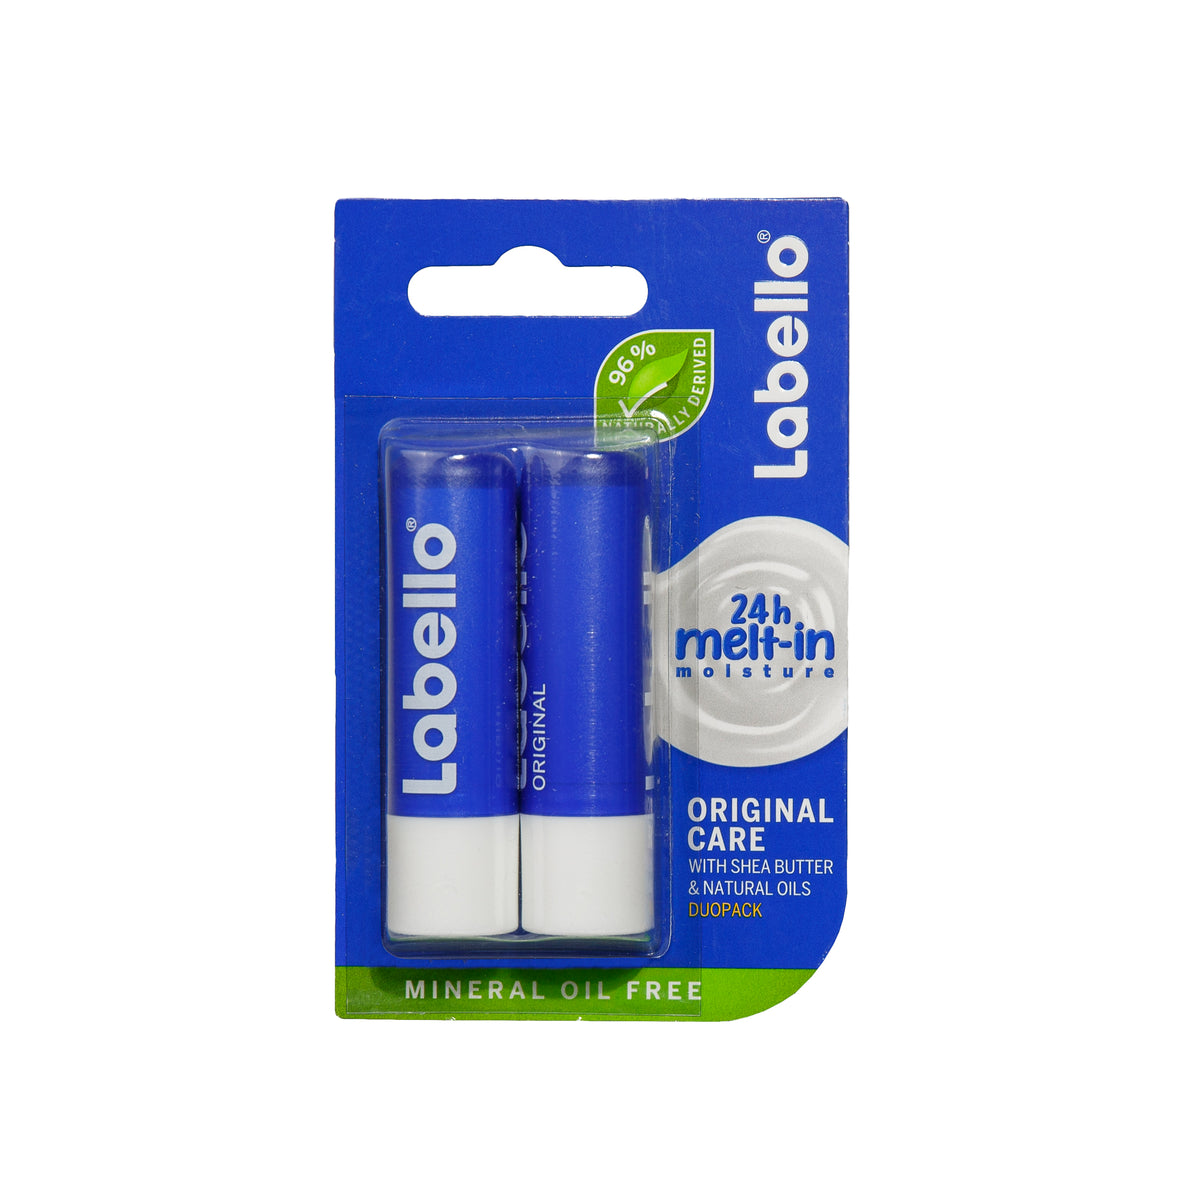 Primary Image of Original Lip Balm Double Pack